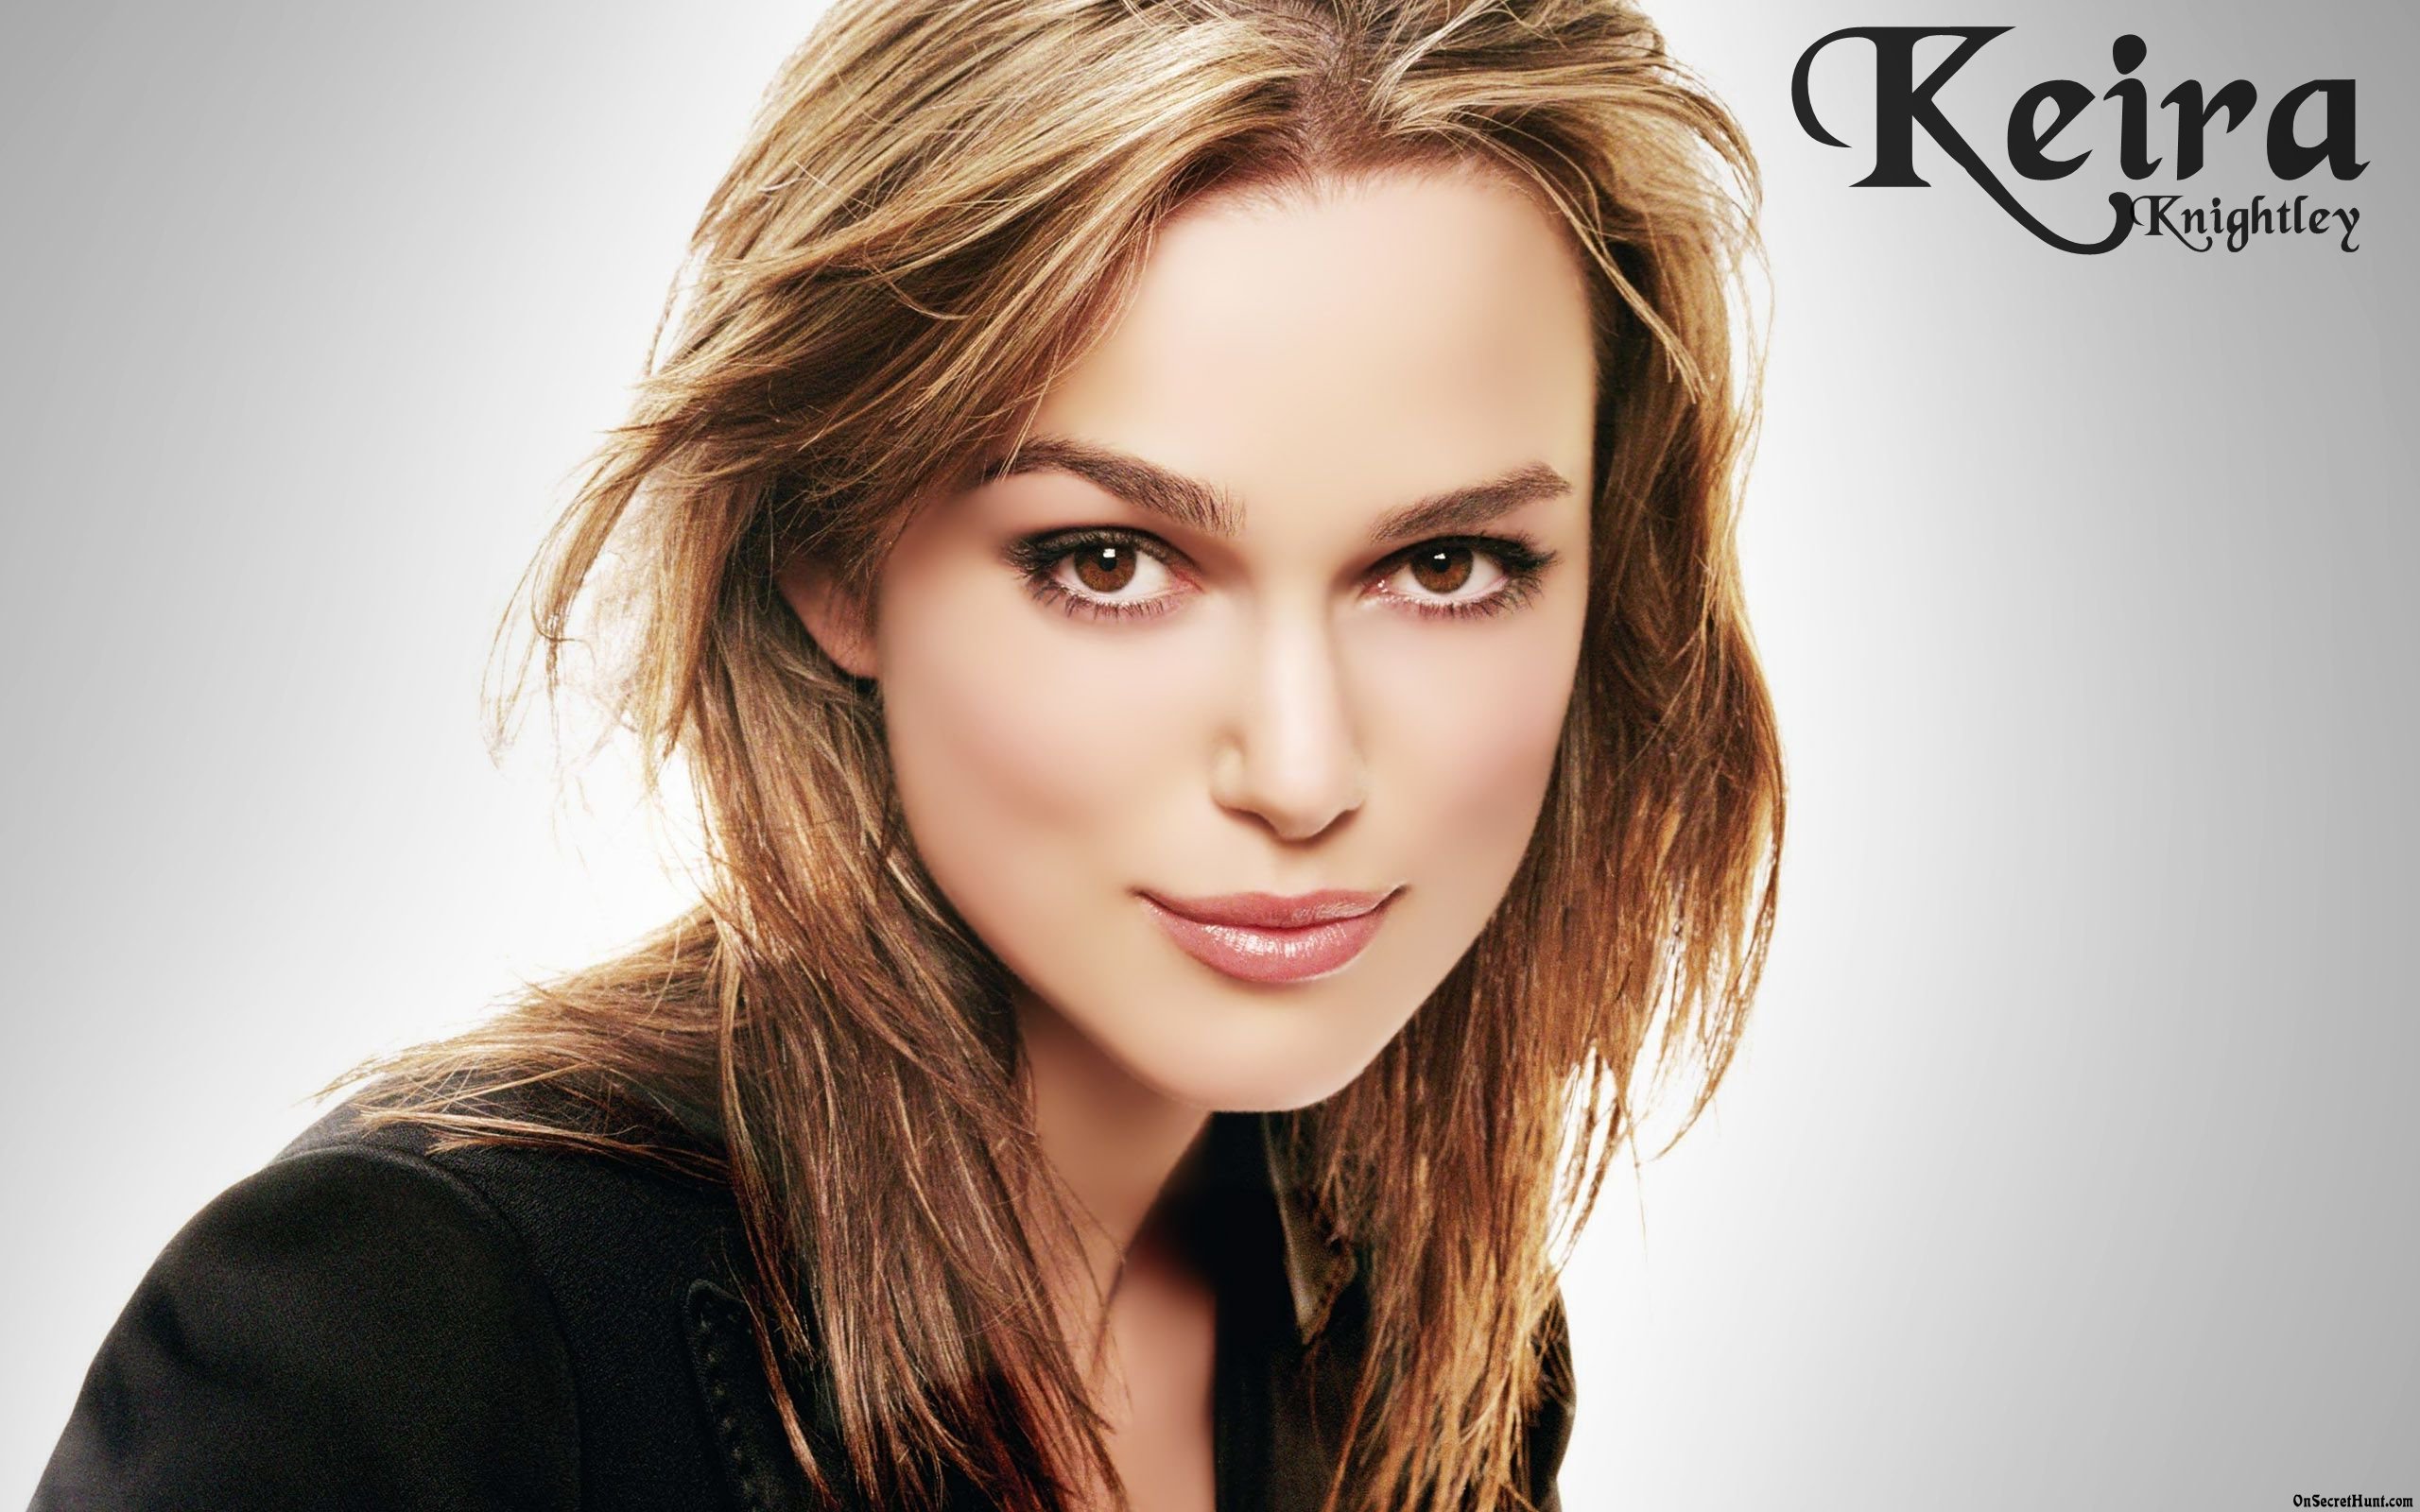 Keira Knightley Wallpaper High Resolution And Quality